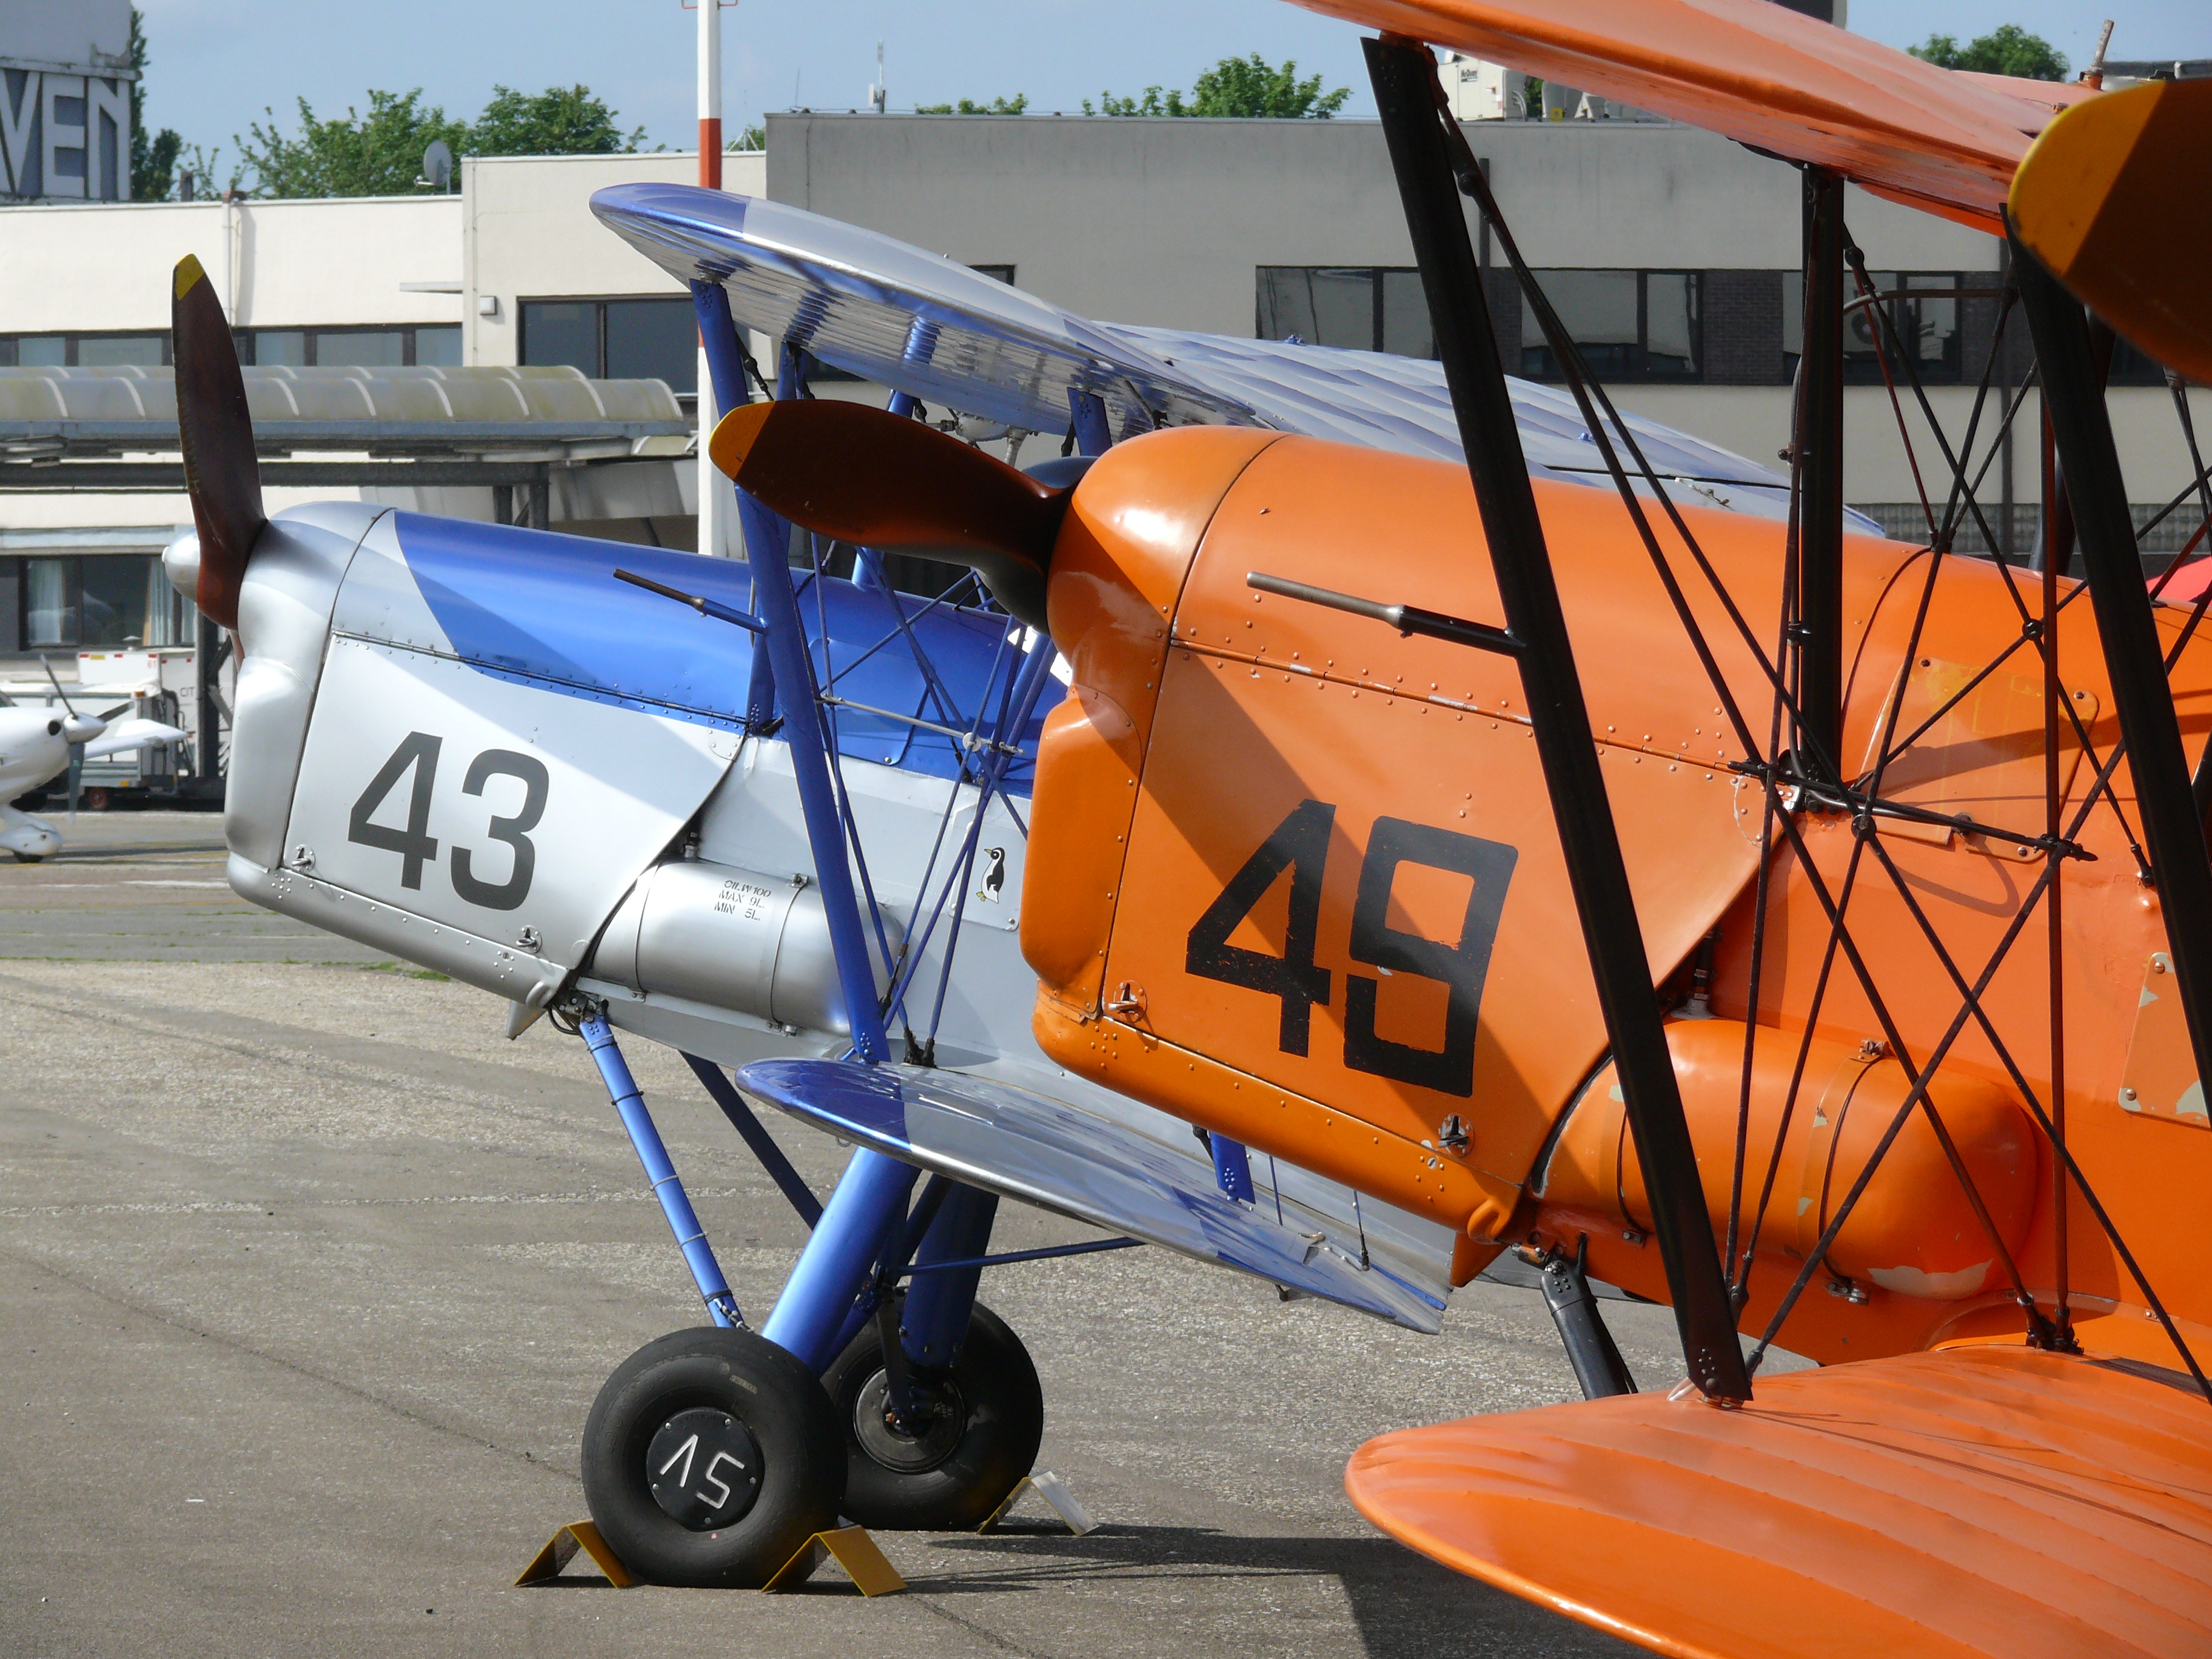 Stampe SV4s at Fly In 03